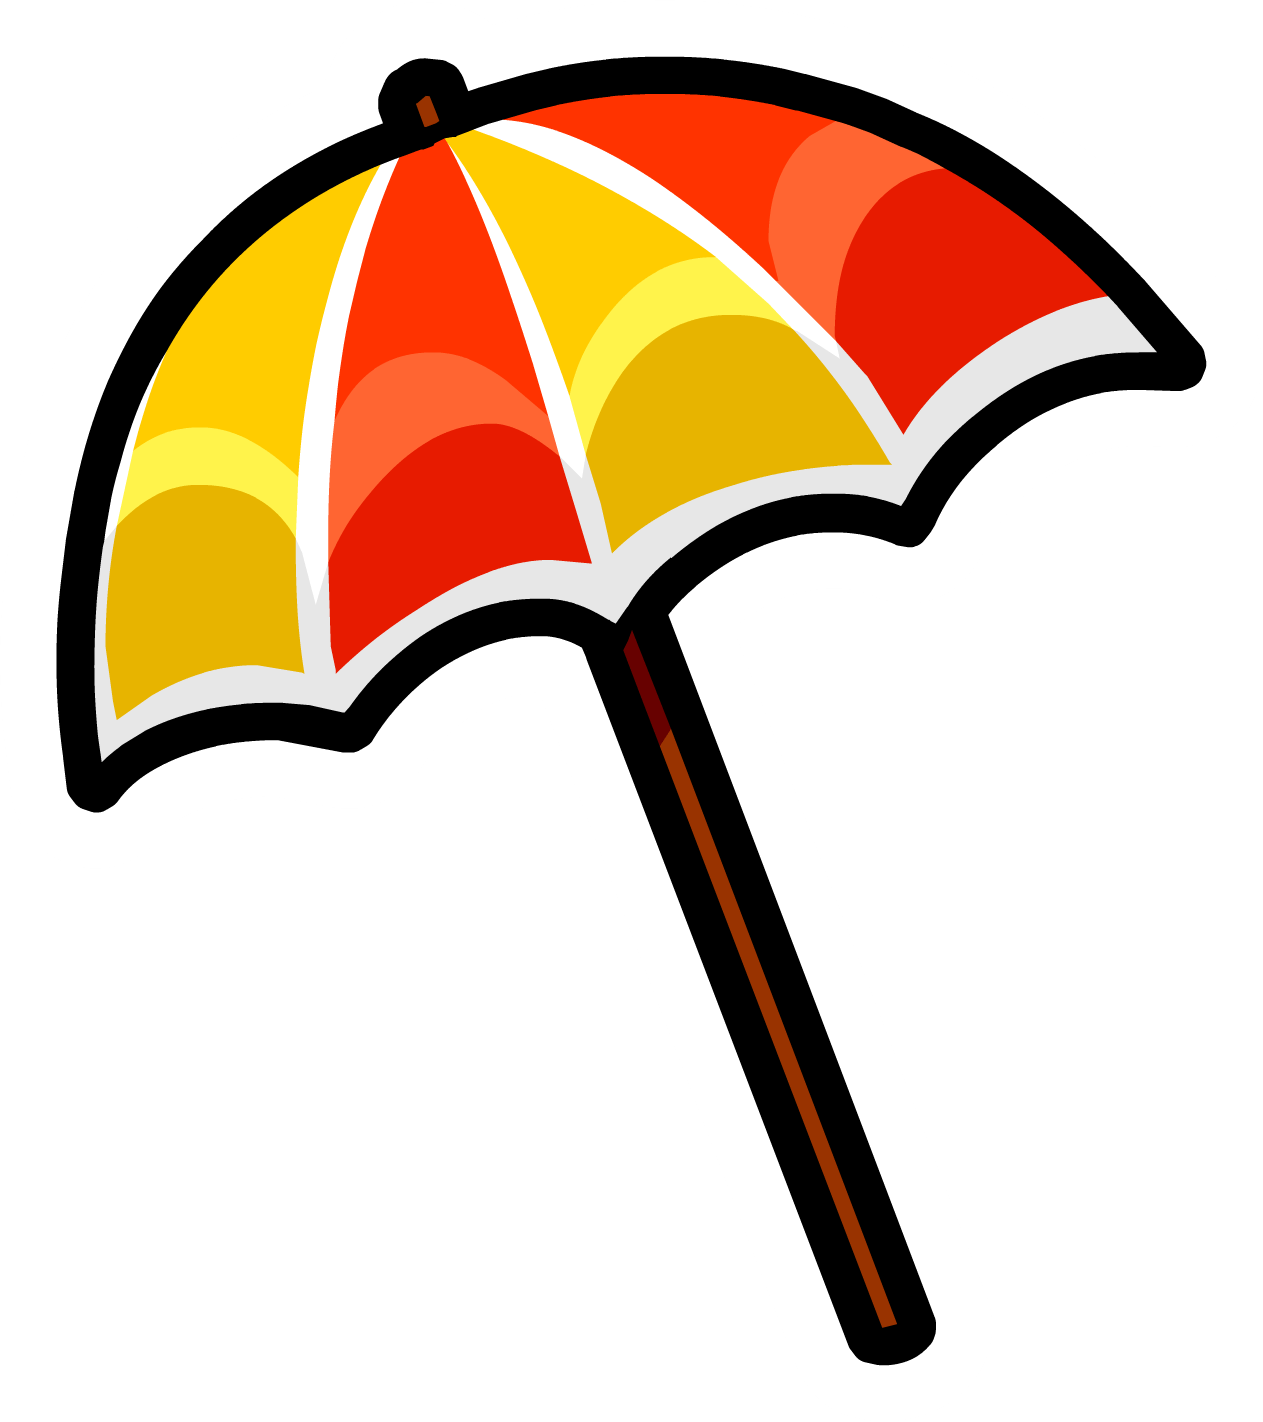 Coloring Pages Beach Umbrella. coloring pages of oranges coloring ...